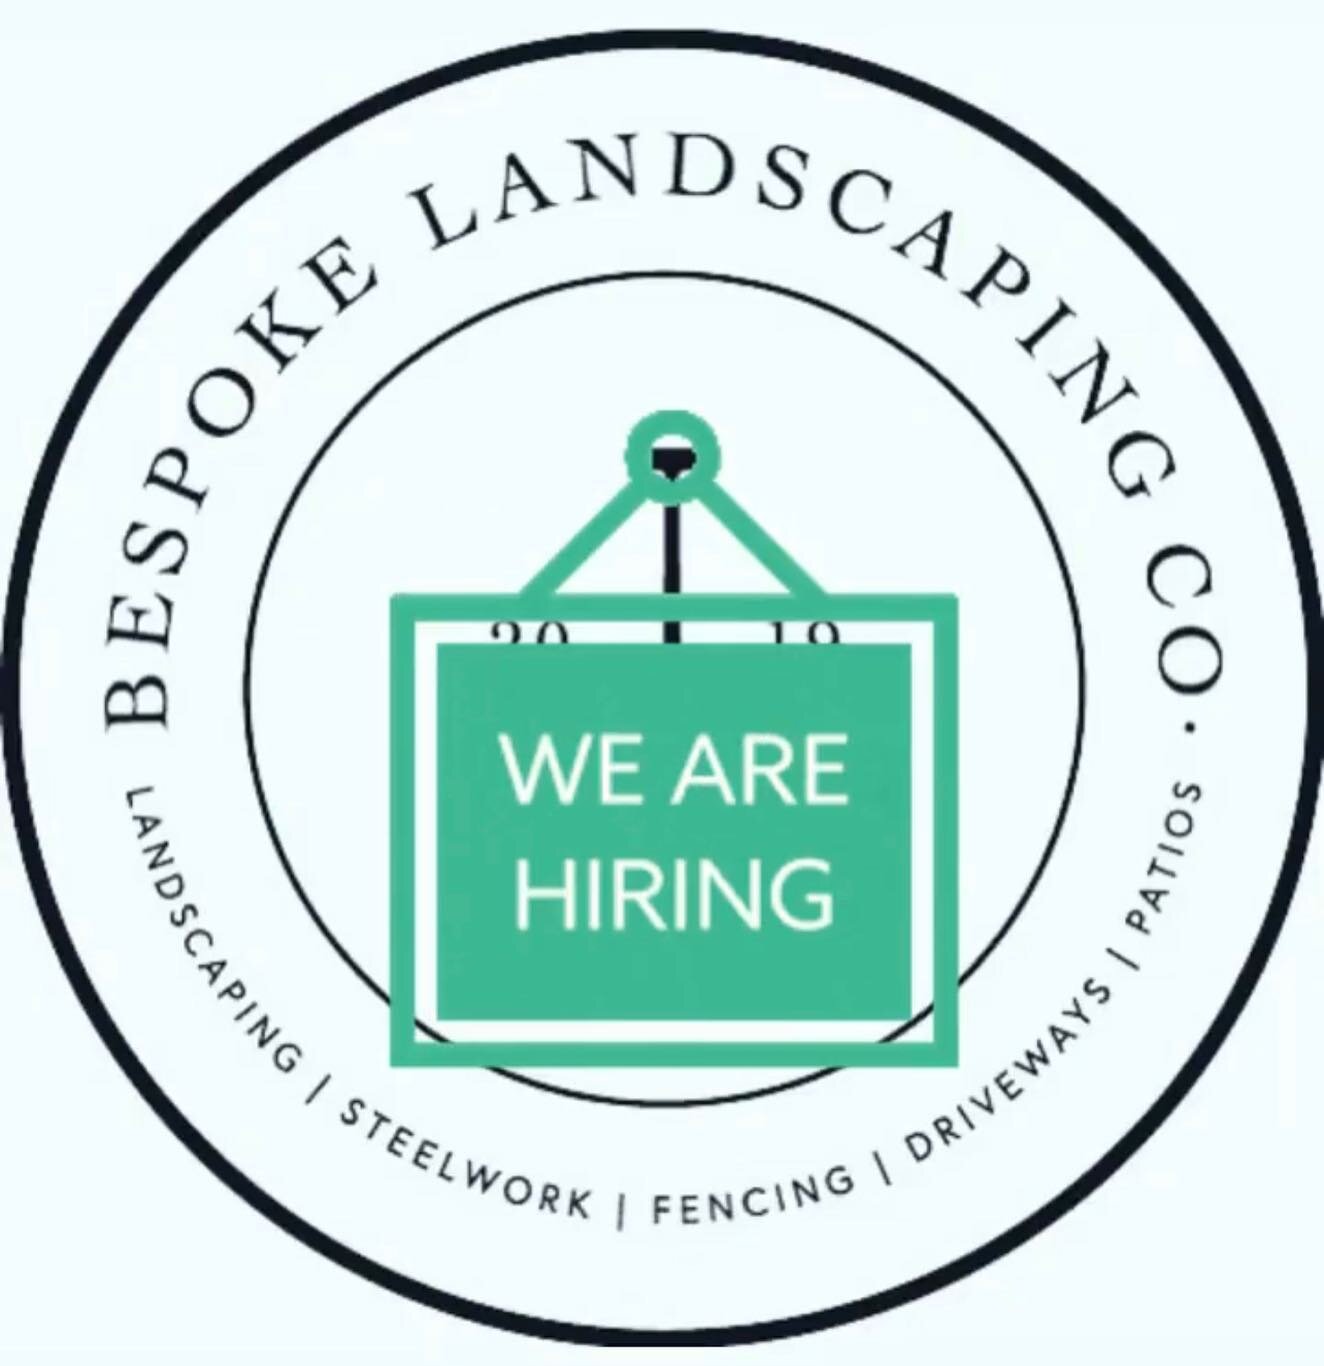 ***Exciting Opportunity****

We are excited to announce that we are expanding our Bespoke Landscaping Co. team again and are on the look out for an experienced landscaper to join us as soon as possible.

The successful applicant must have at least tw